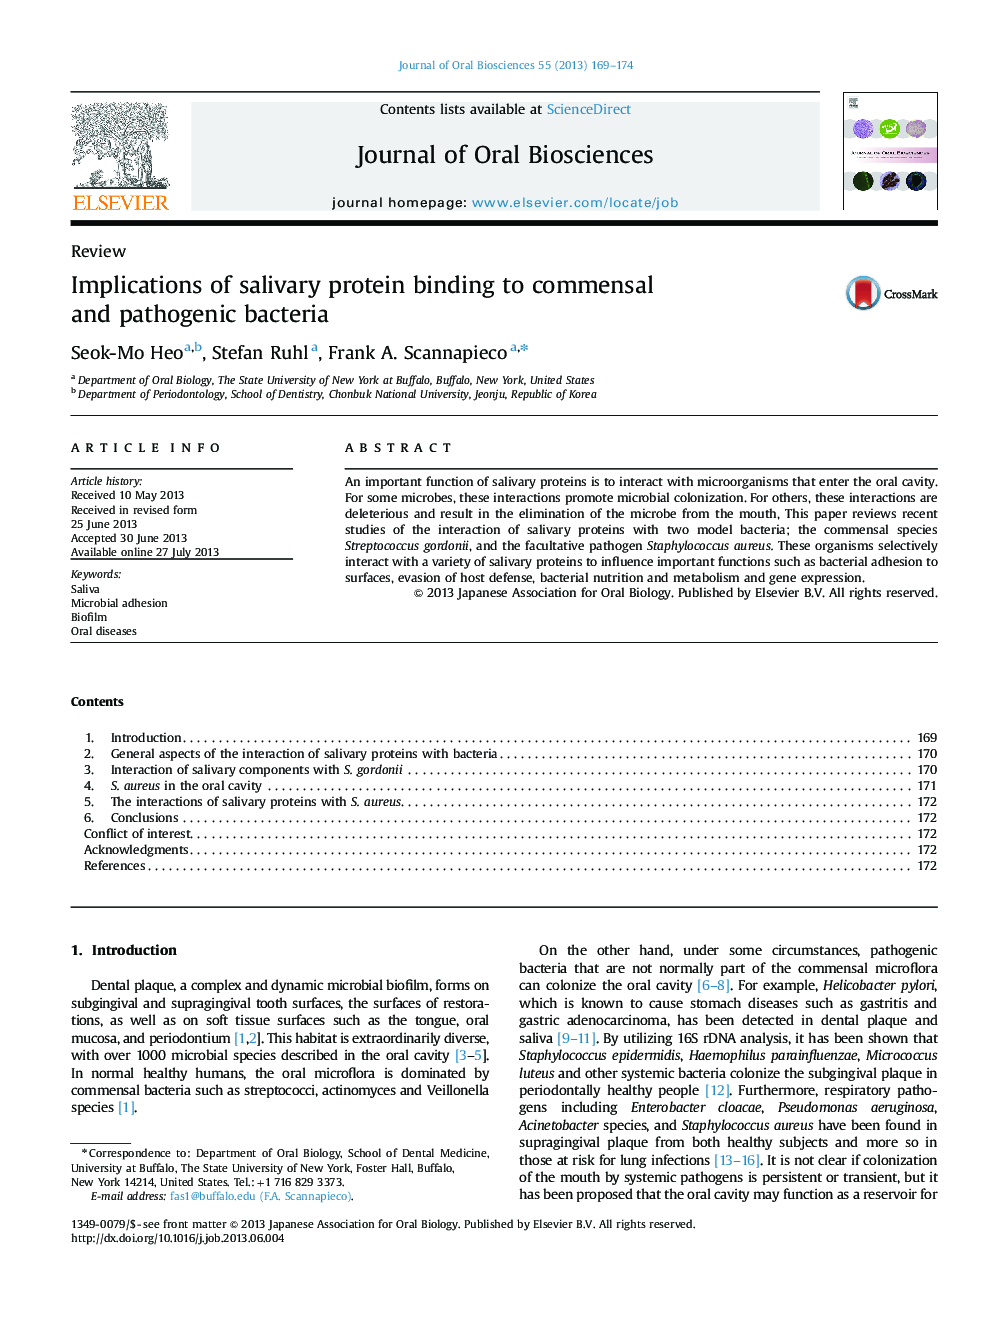 Implications of salivary protein binding to commensal and pathogenic bacteria